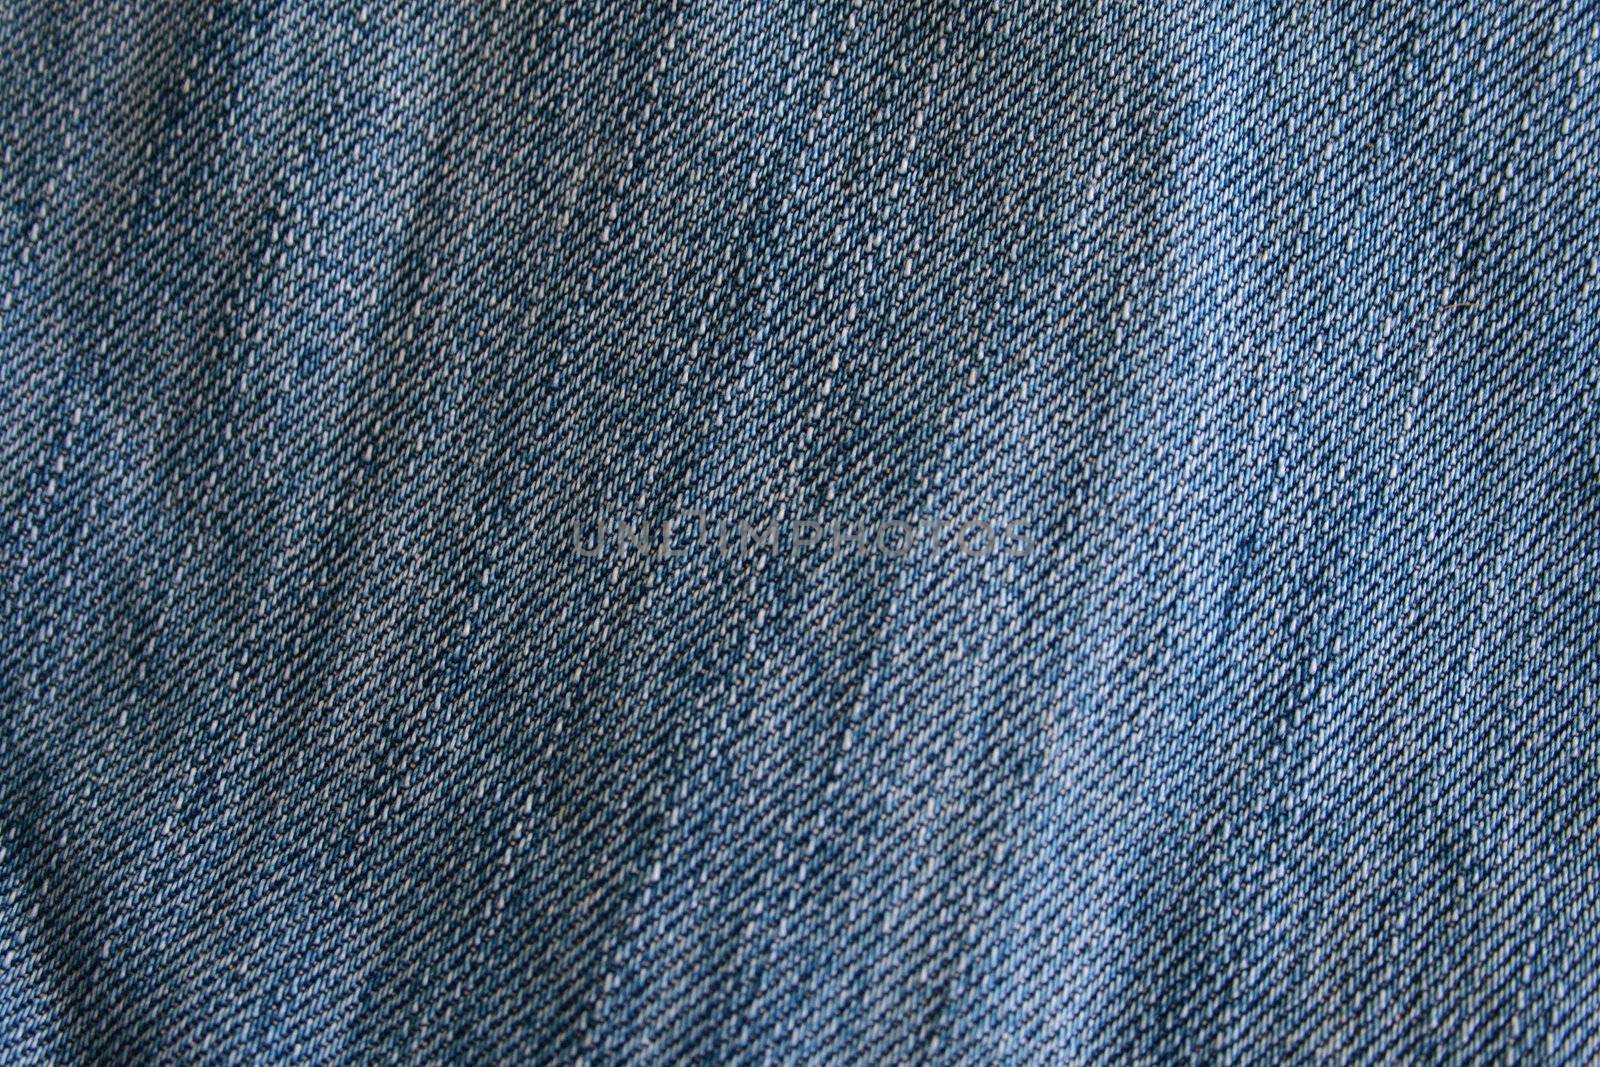 texture of blue jeans cloth (may used as background)